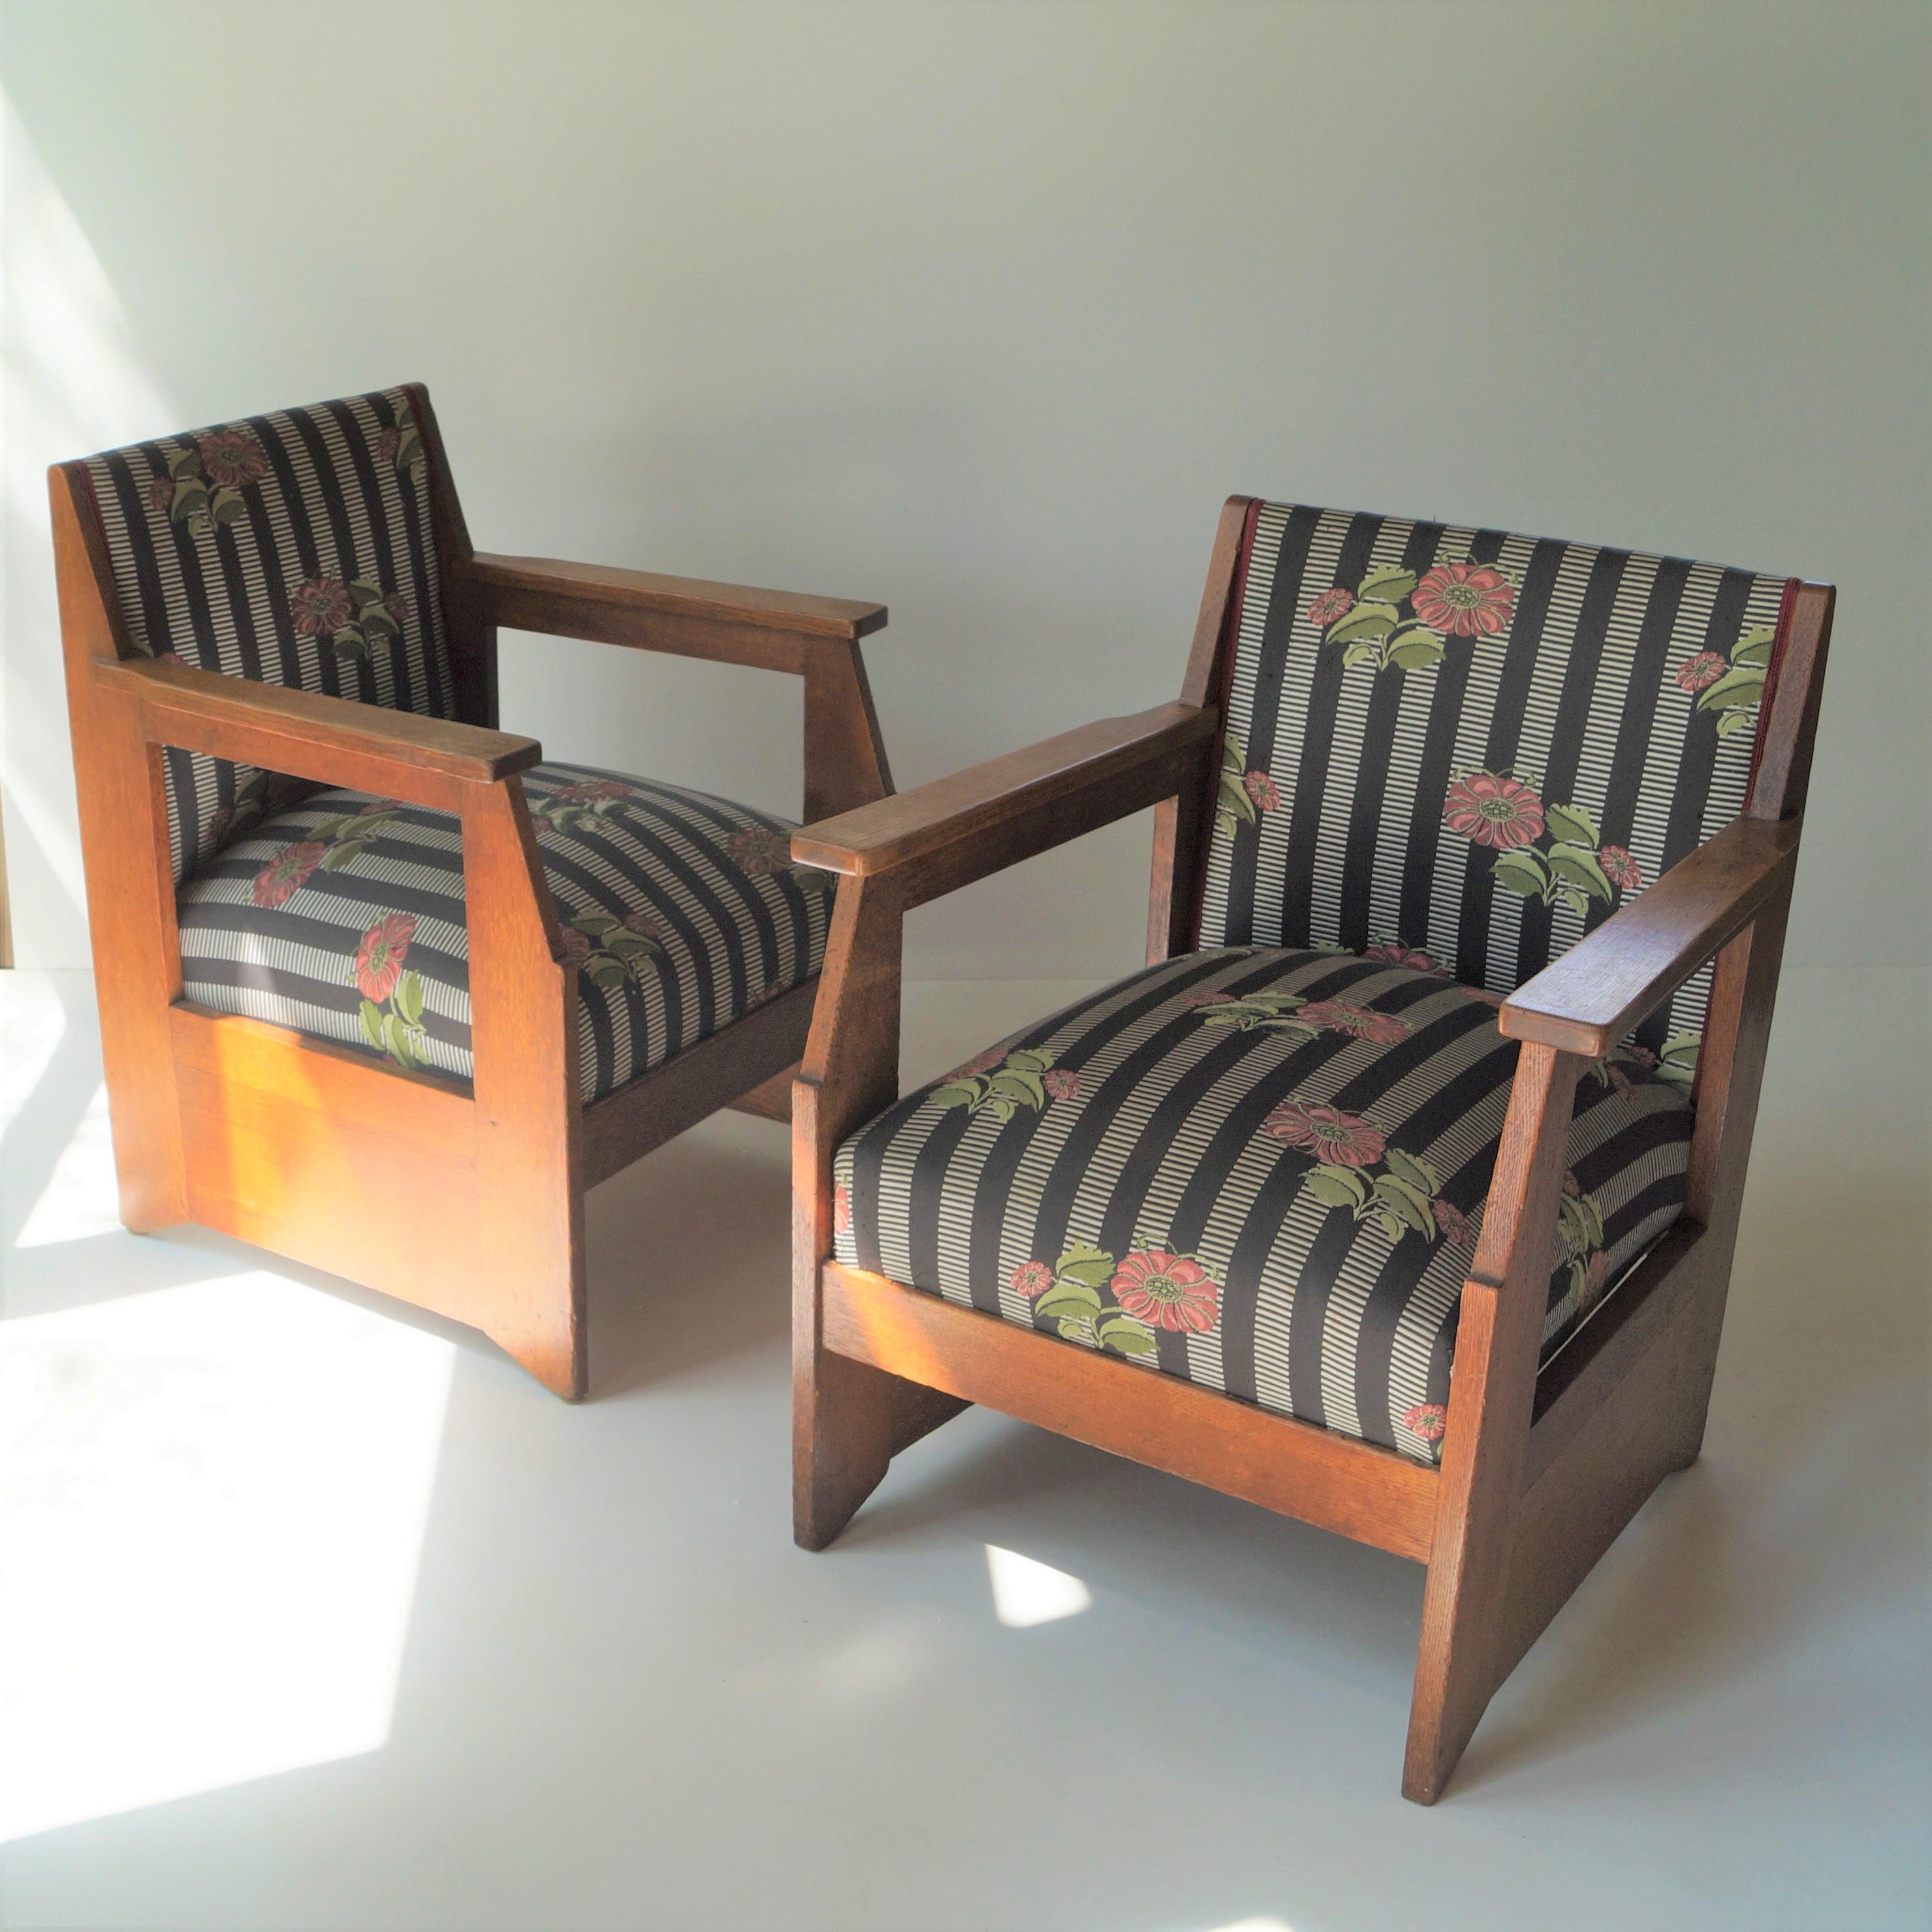 Rather rare to find set of armchairs by Hendrik Wouda for Pander & sons, 1924. One of the signature designs by Hendrik Wouda, also depicted in the most referenced monographs about his life and work (picture included). A similar chair is also